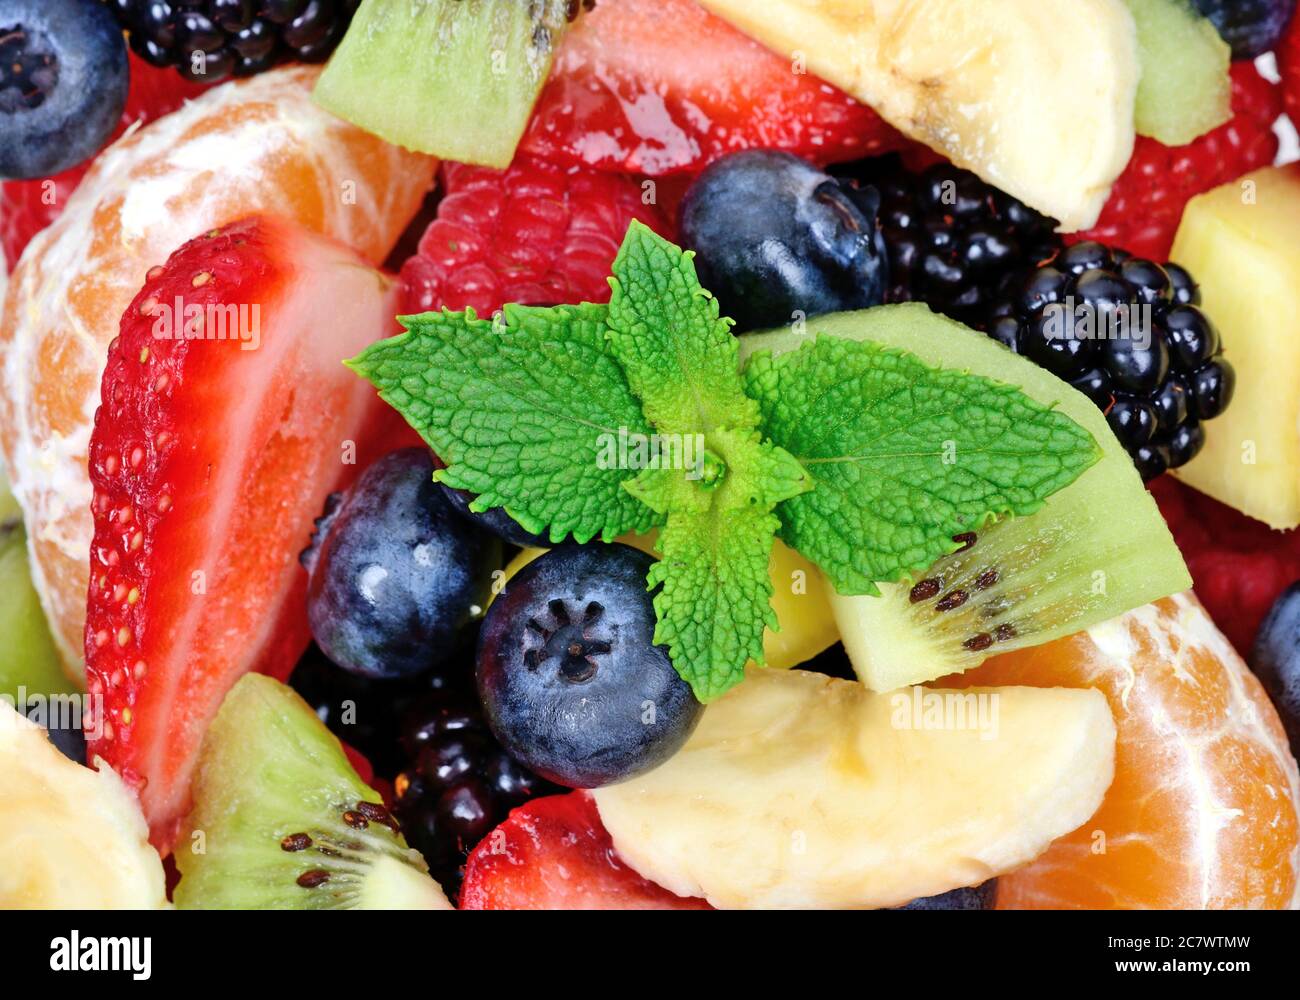 Close up of top view of a fruit salad with strawberries, oranges, kiwi, blueberries and bananas Stock Photo